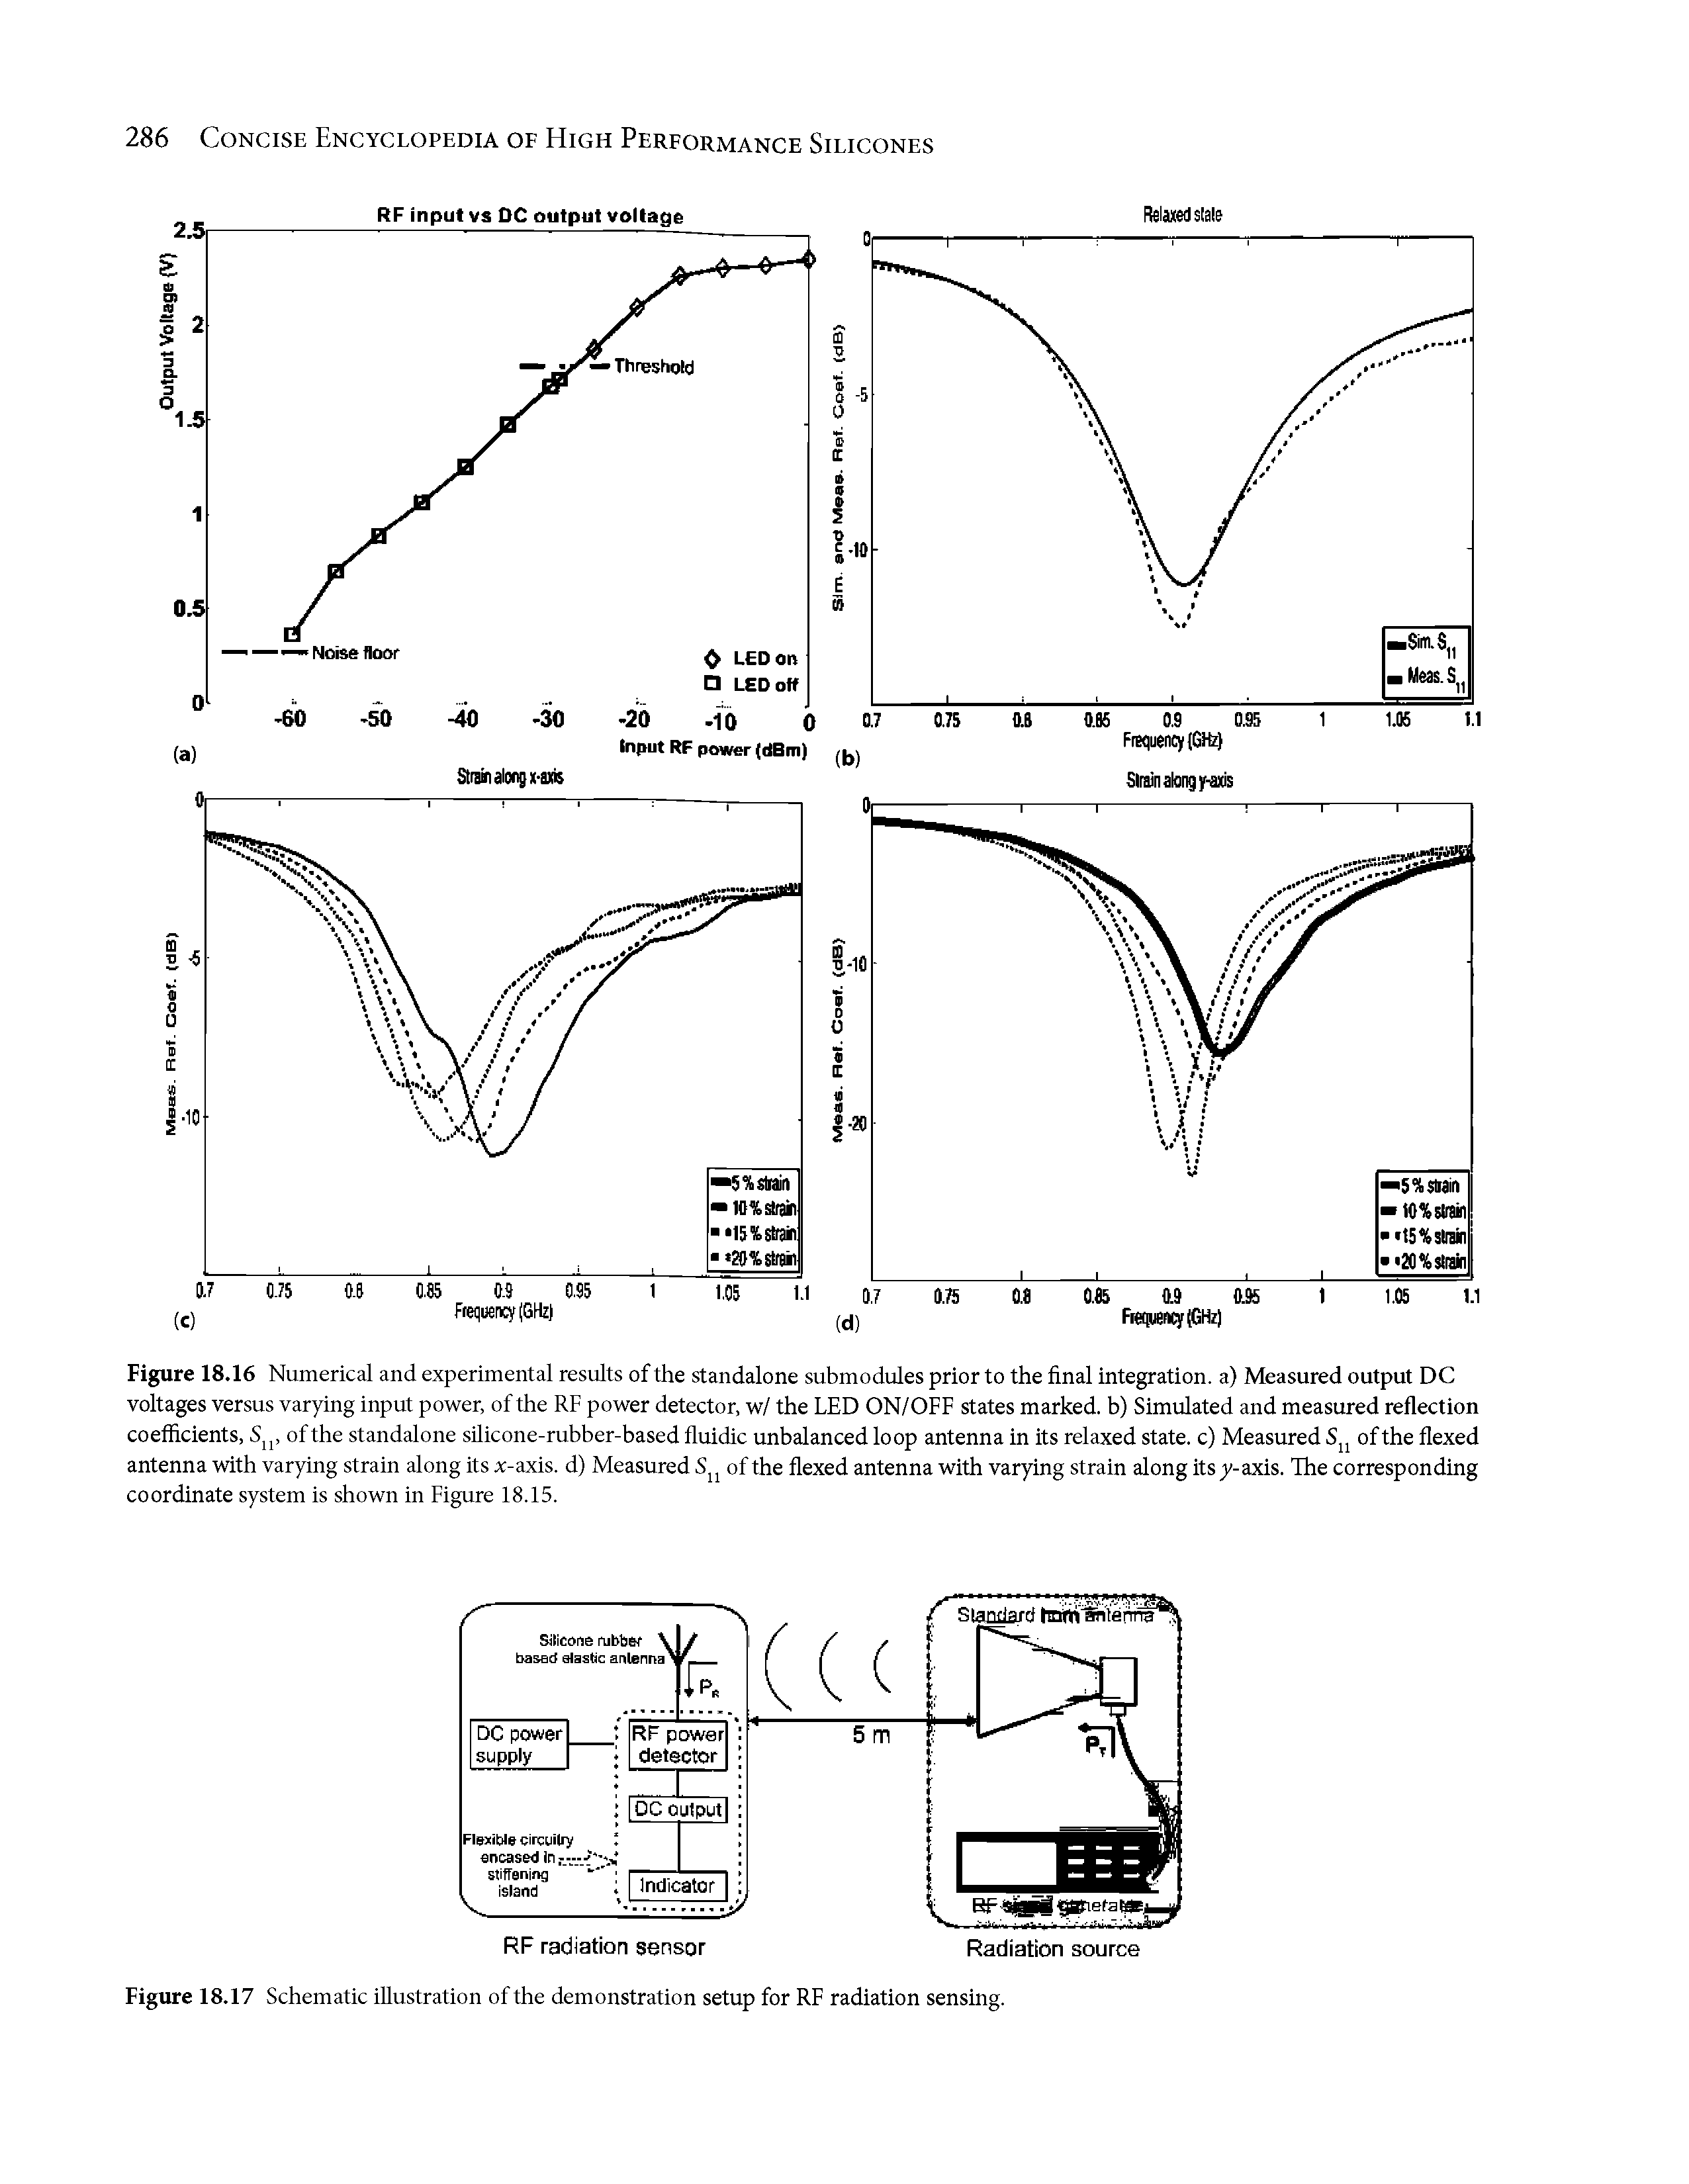 Figure 18.16 Numerical and experimental results of the standalone submodules prior to the final integration, a) Measured output DC voltages versus varying input power, of the RF power detector, w/ the LED ON/OFF states marked, b) Simulated and measured reflection coefficients, S j, of the standalone silicone-rubber-based fluidic unbalanced loop antenna in its relaxed state, c) Measured Sjj of the flexed antenna with varying strain along its x-axis. d) Measured Sjj of the flexed antenna with varying strain along itsy-axis. The corresponding coordinate system is shown in Figure 18.15.